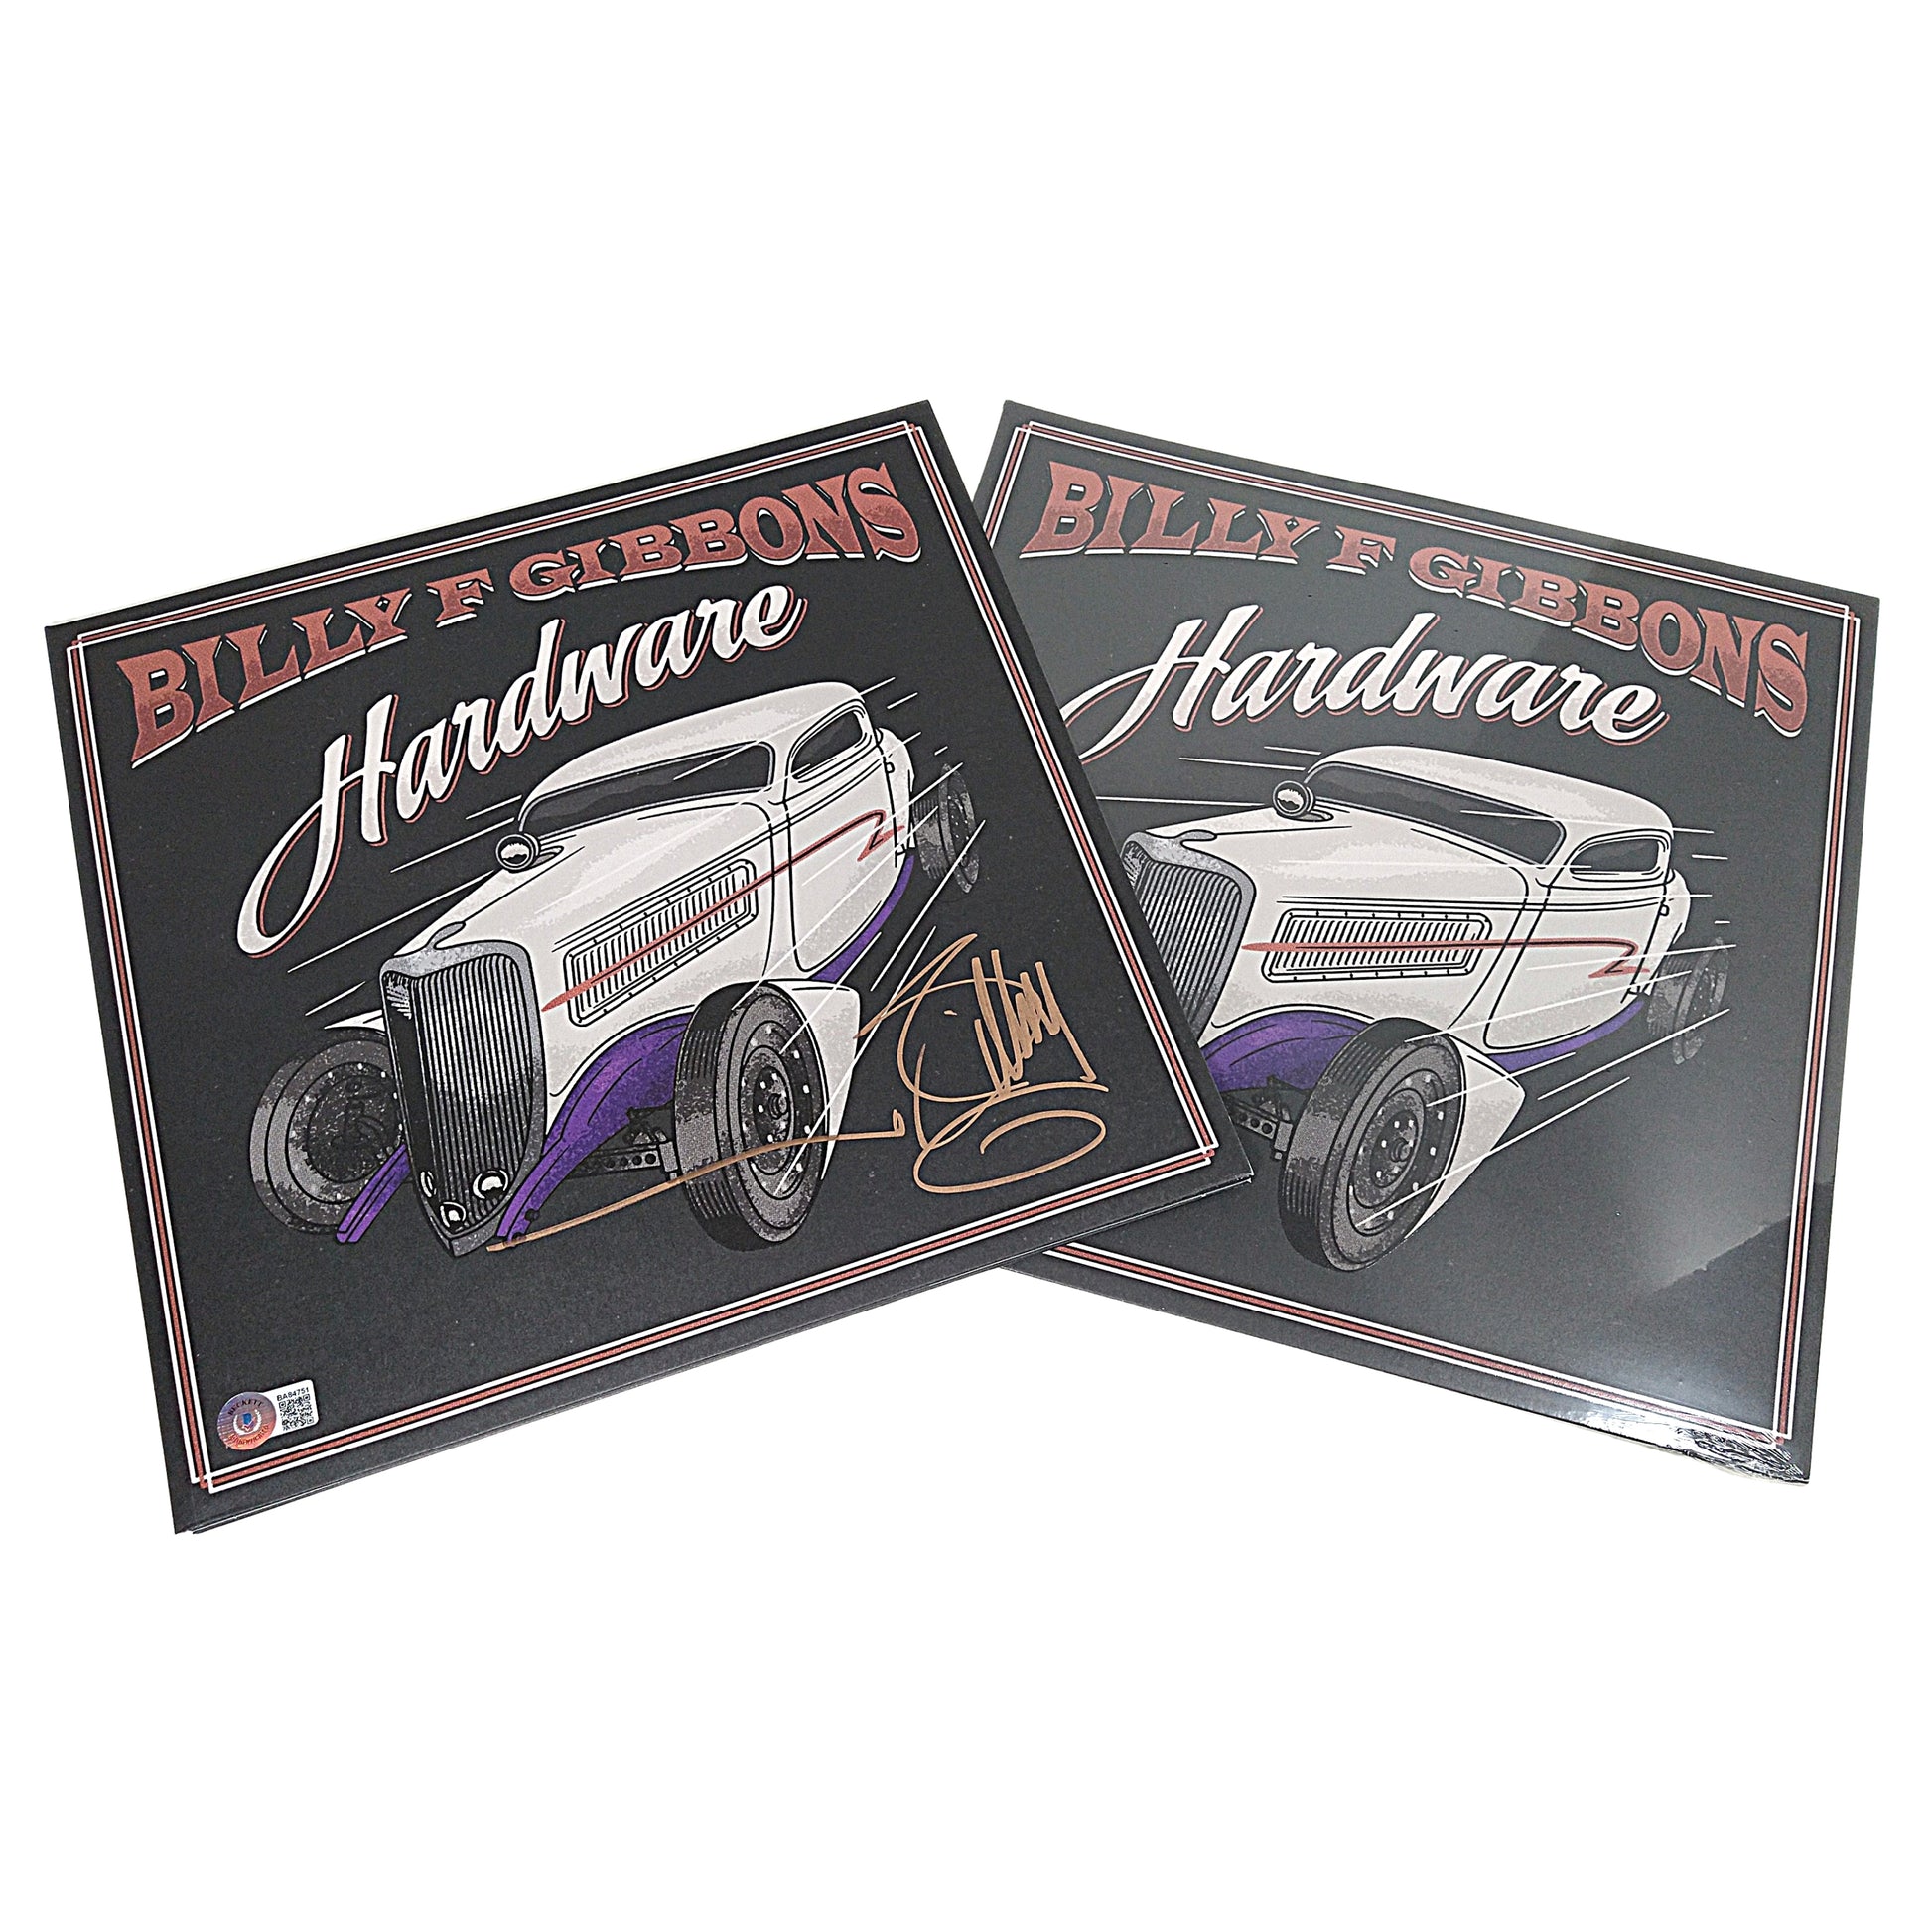 Music- Autographed- Billy Gibbons of ZZ Top Signed Hardware Vinyl Record Album Cover with Sealed Brand New Hardware Vinyl Record Beckett BAS Authentication 102